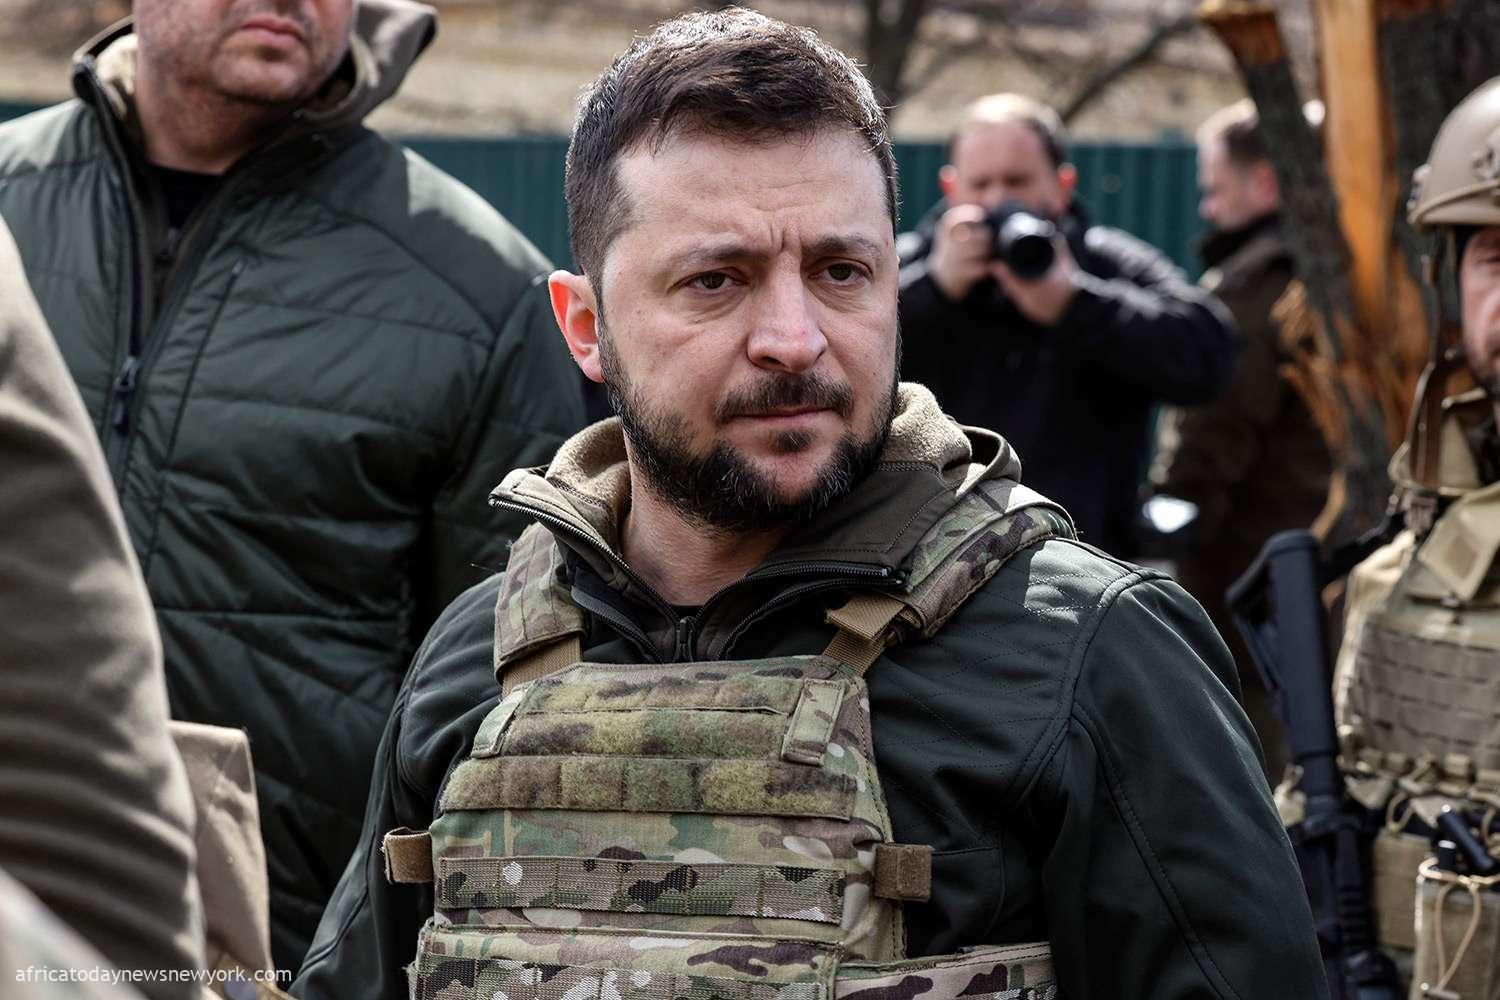 Dam Blast Will Not Stop Our Military Plans, Zelenskyy Insists